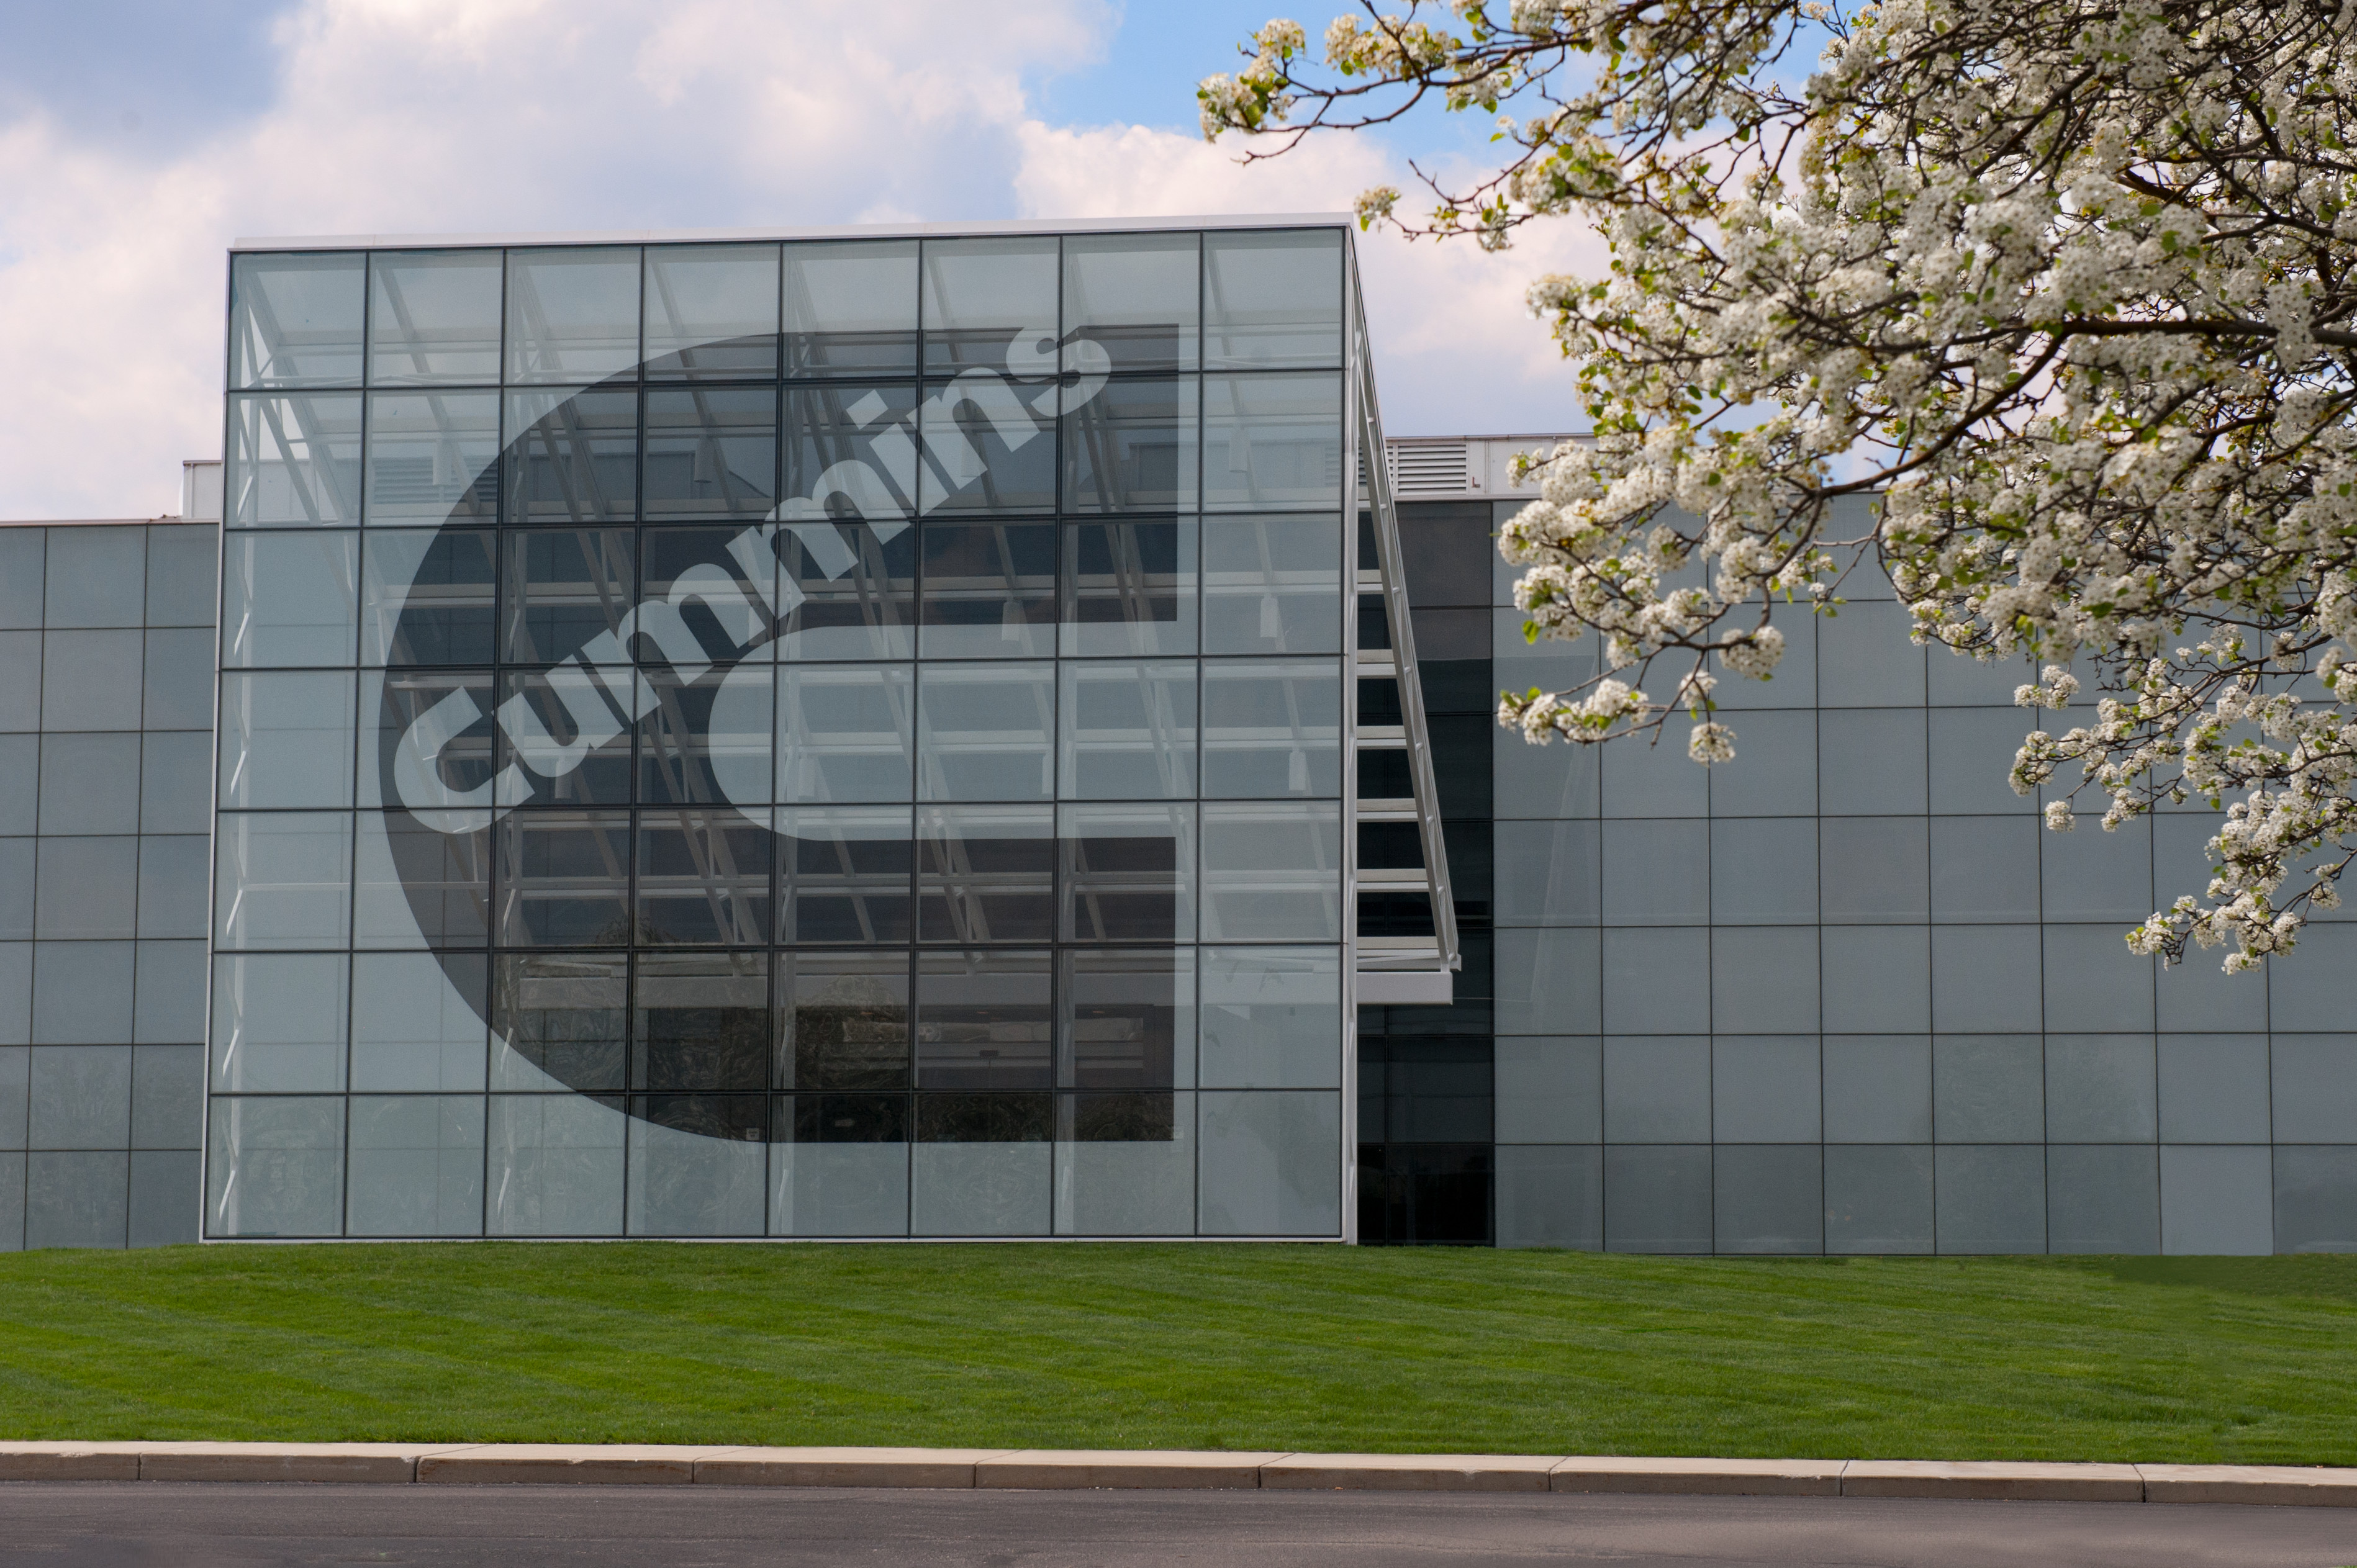 Columbus Engine Plant is one of Cummins’ manufacturing facilities. It is now home to the Electrified Power Business.